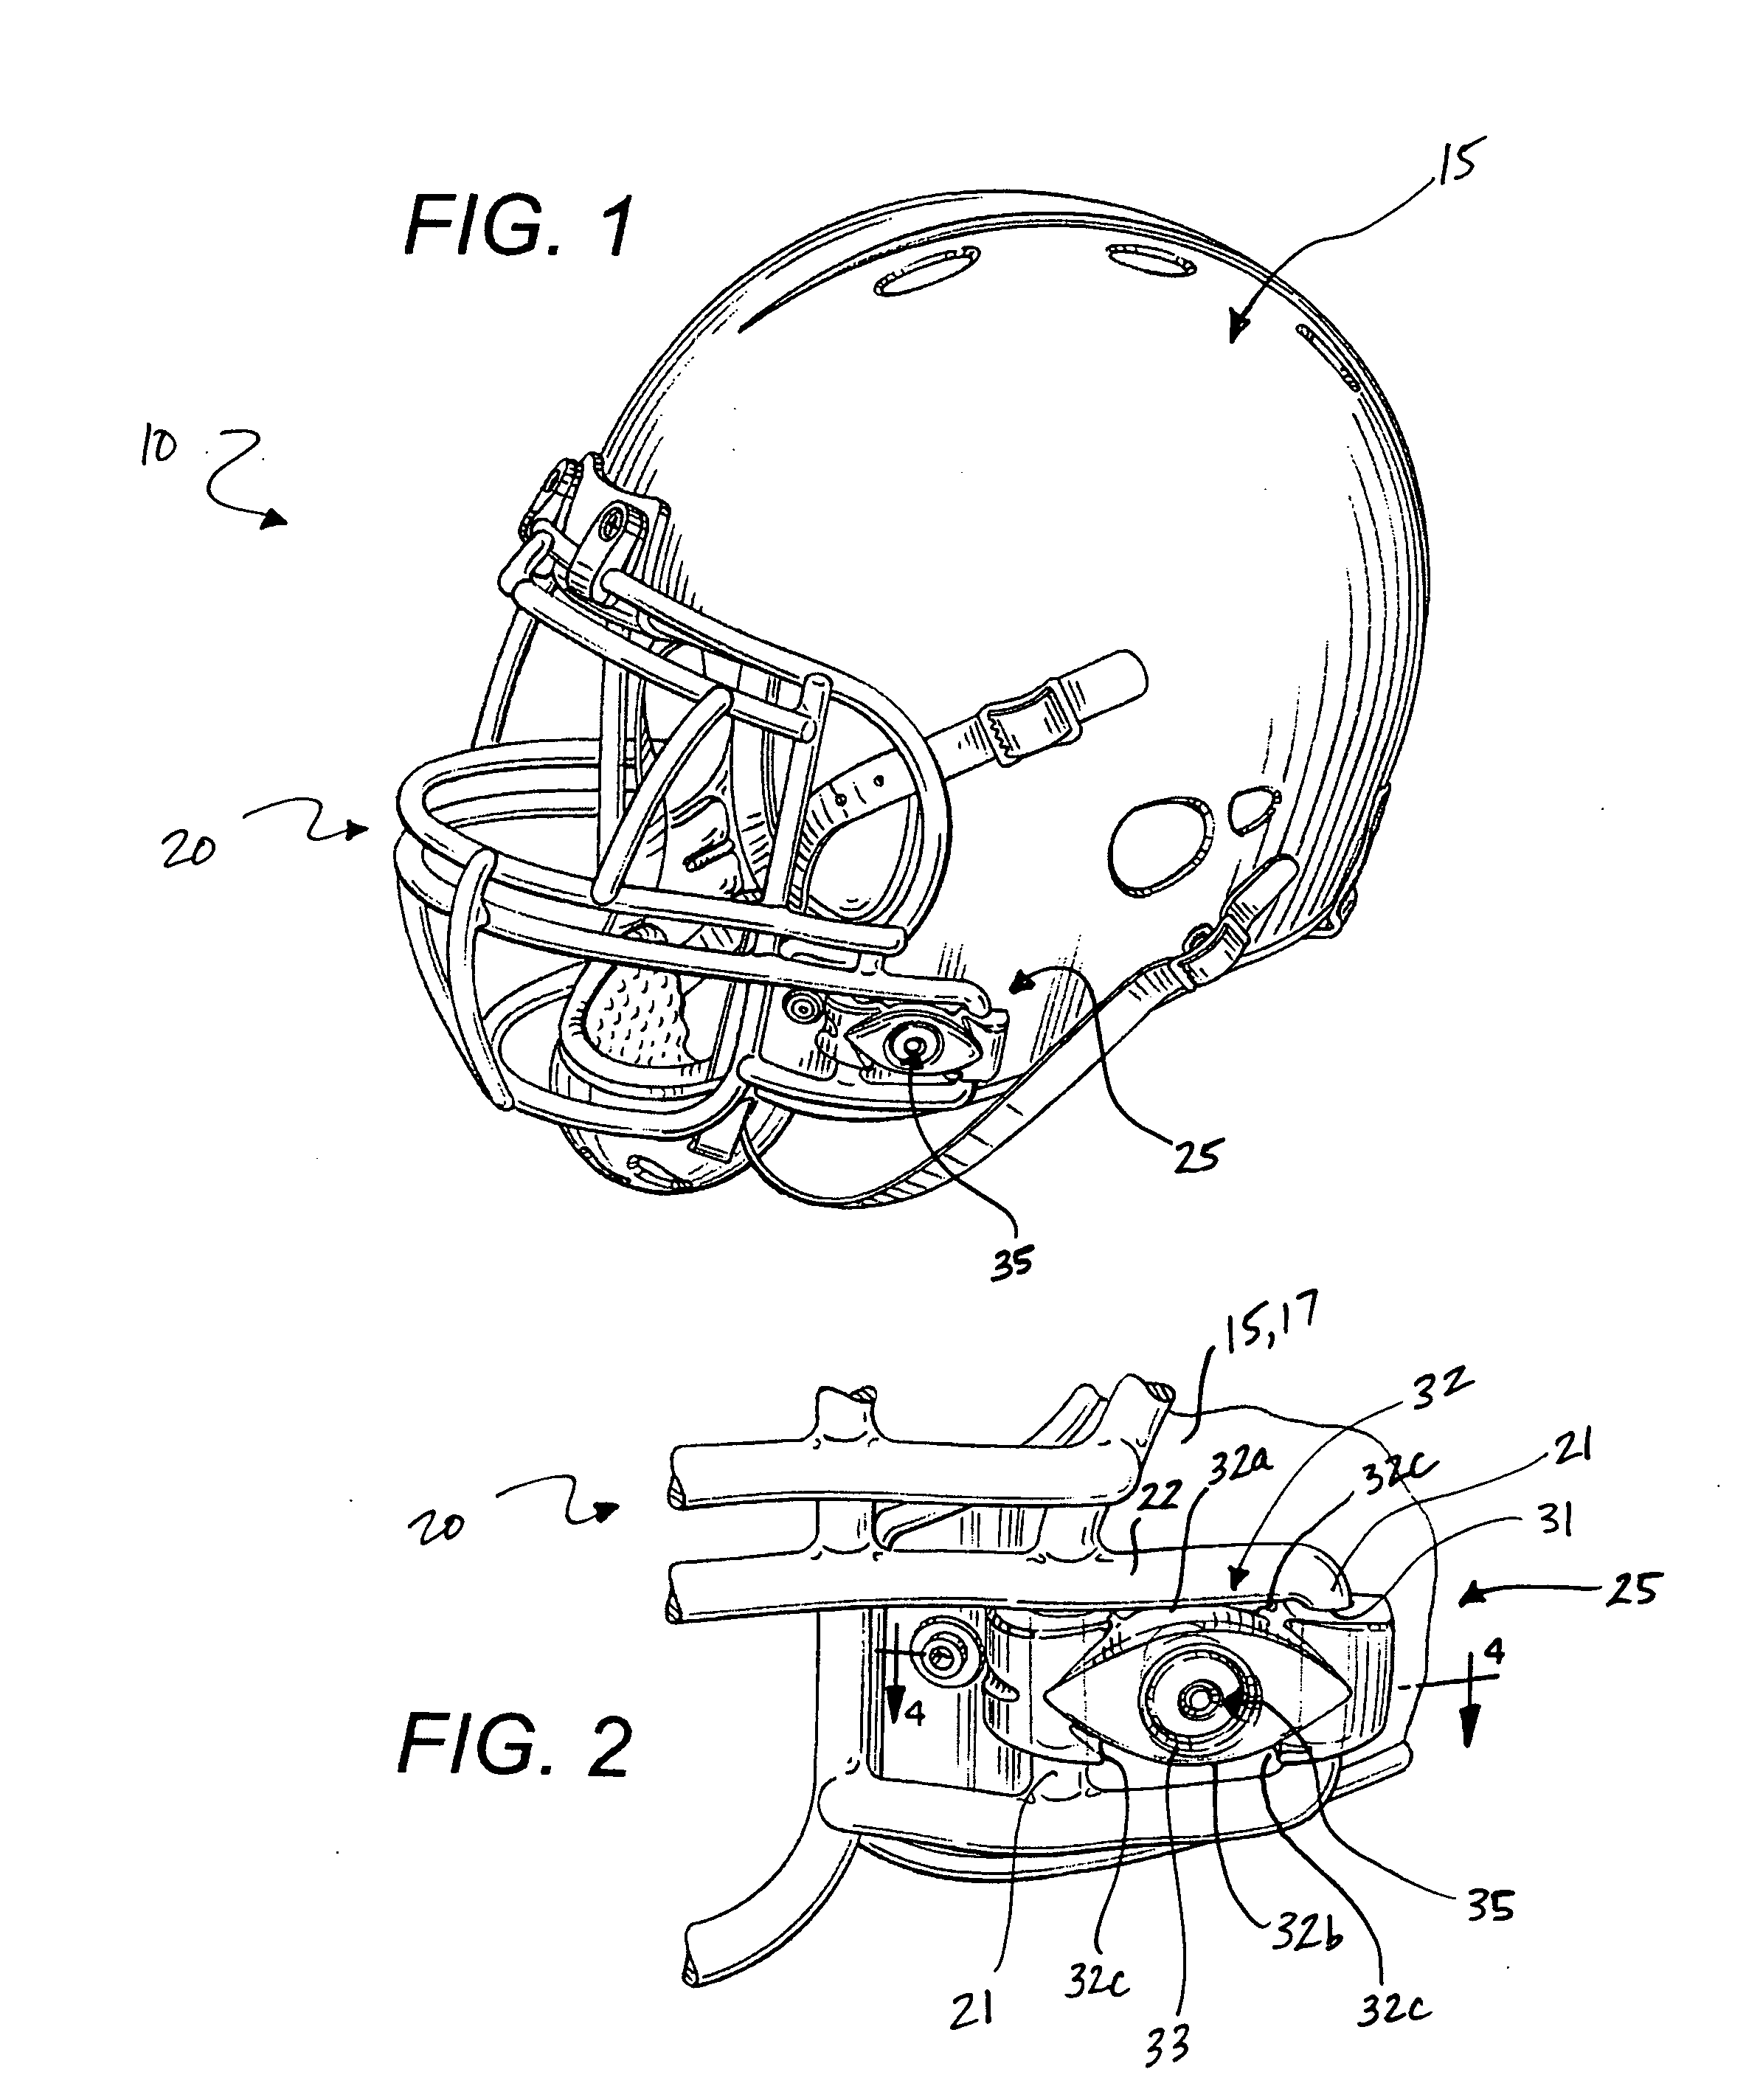 Sports helmet with quick-release faceguard connector and adjustable internal pad element